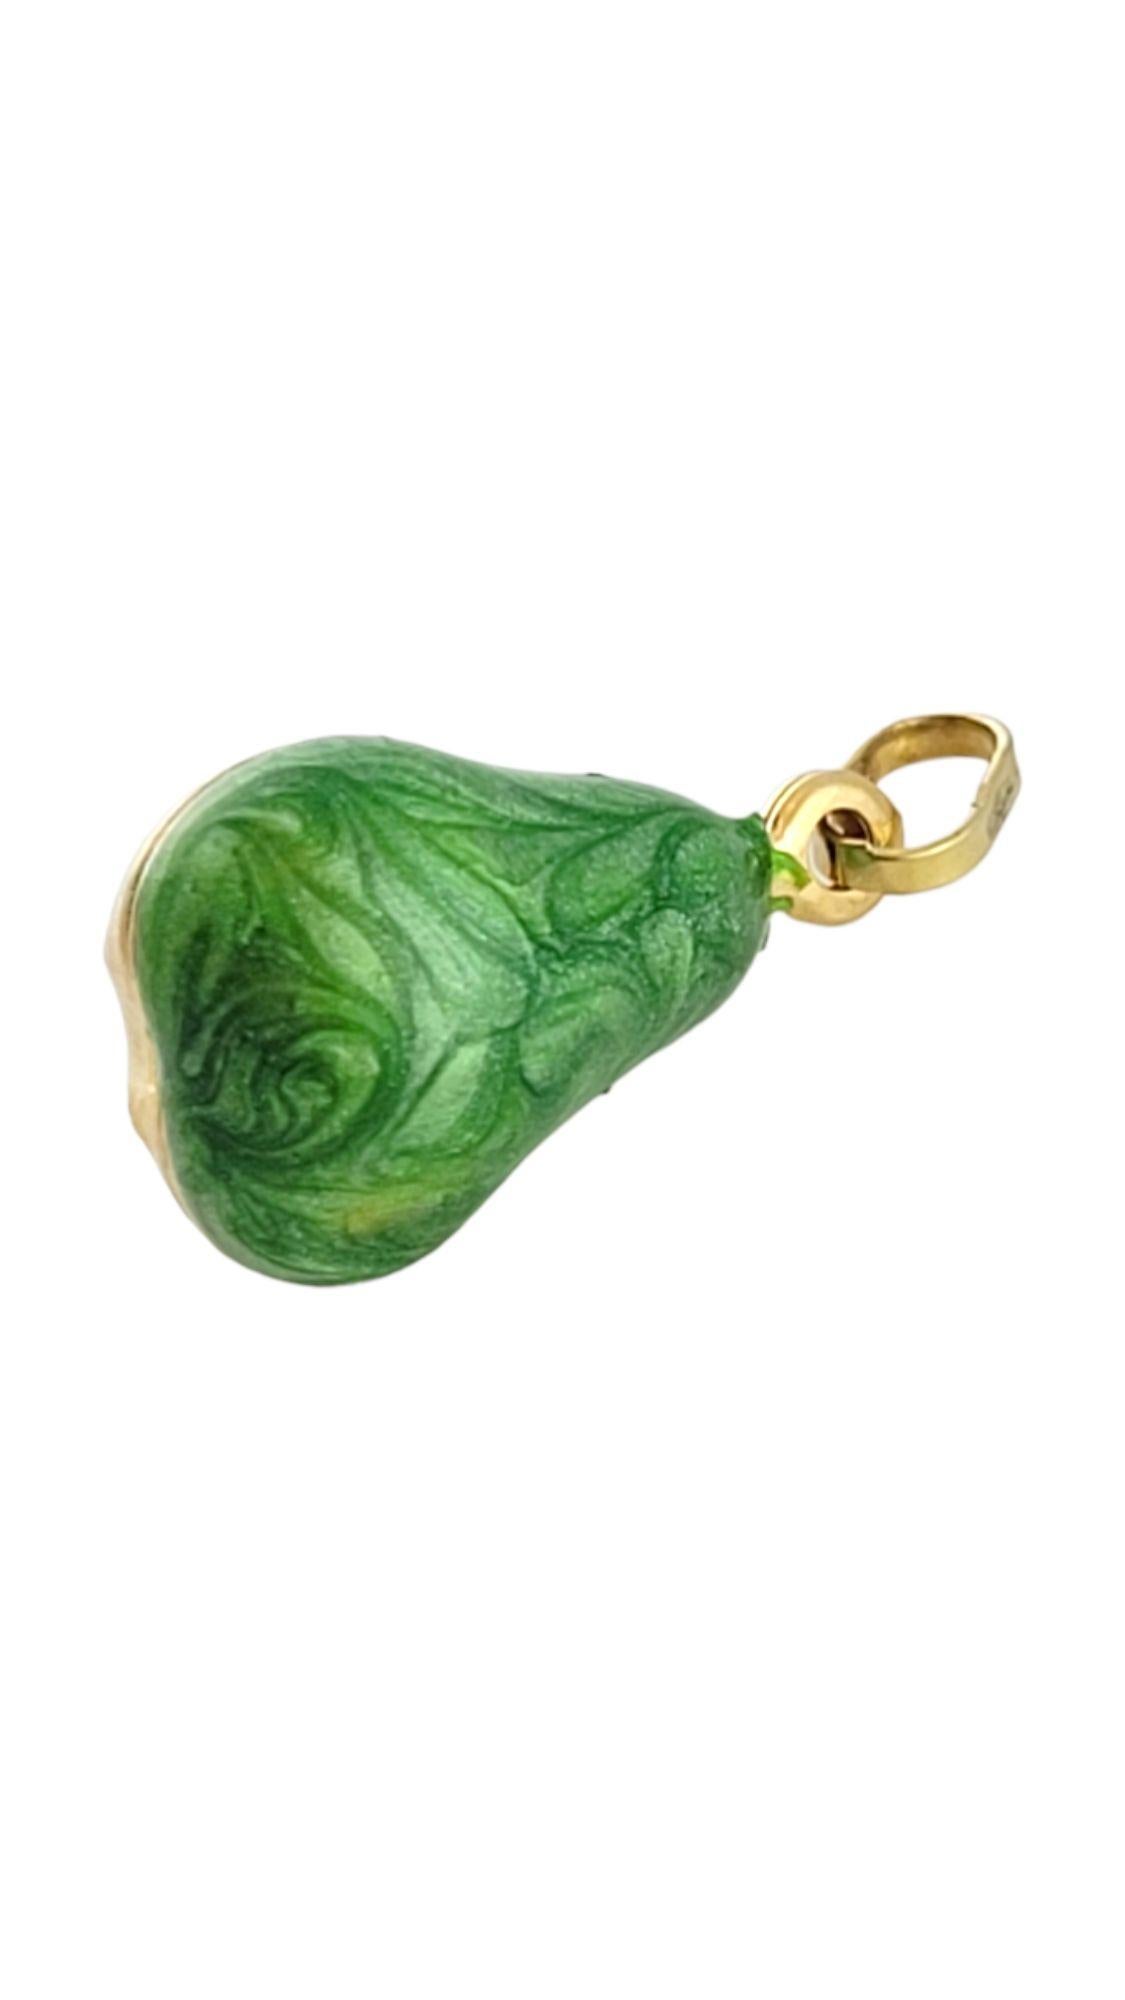 18K Yellow Gold Pear Charm with Green Enamel #14535 In Good Condition For Sale In Washington Depot, CT